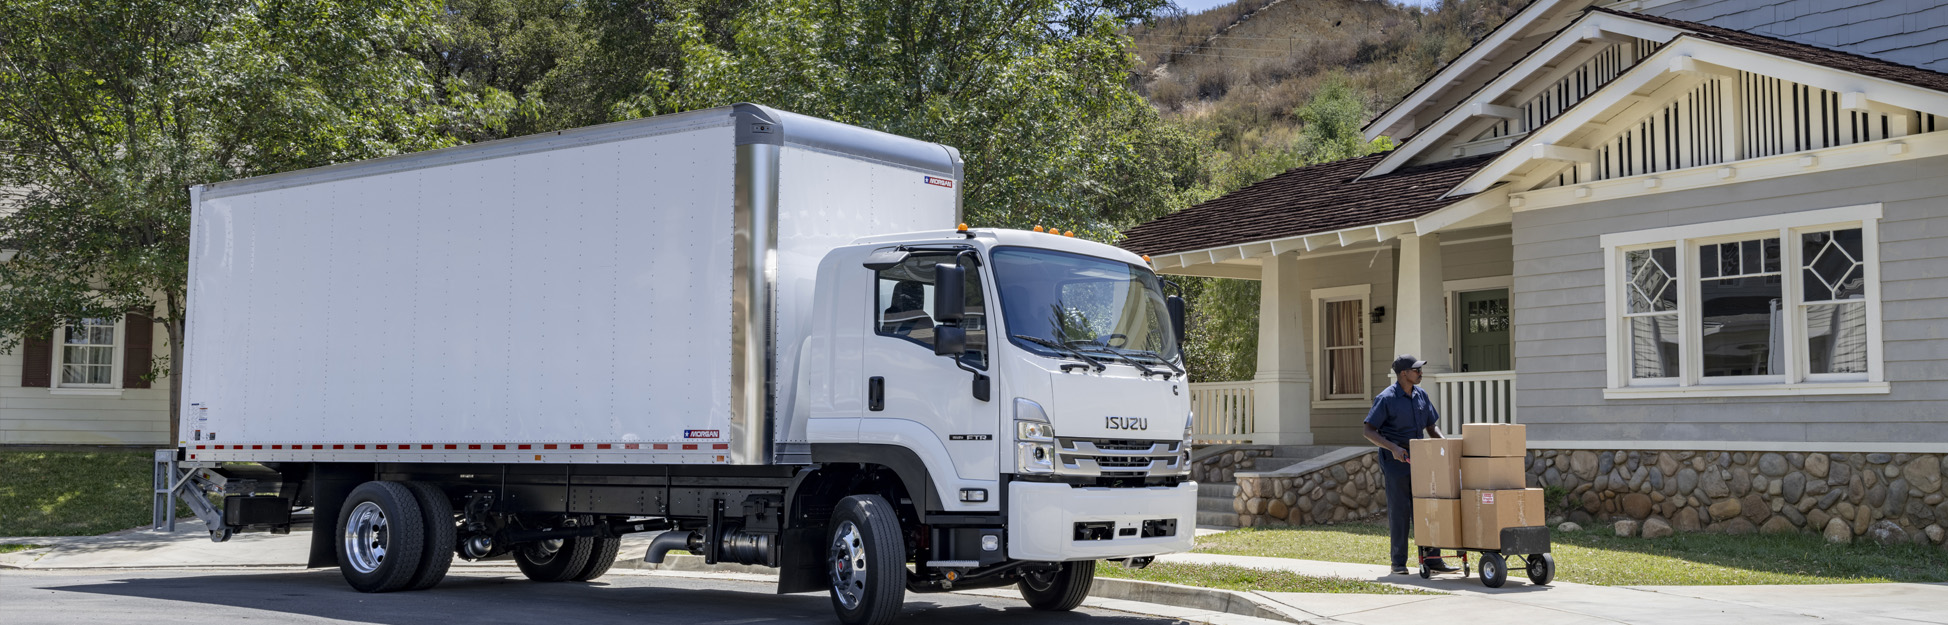 Residential delivery being made using an Isuzu truck.